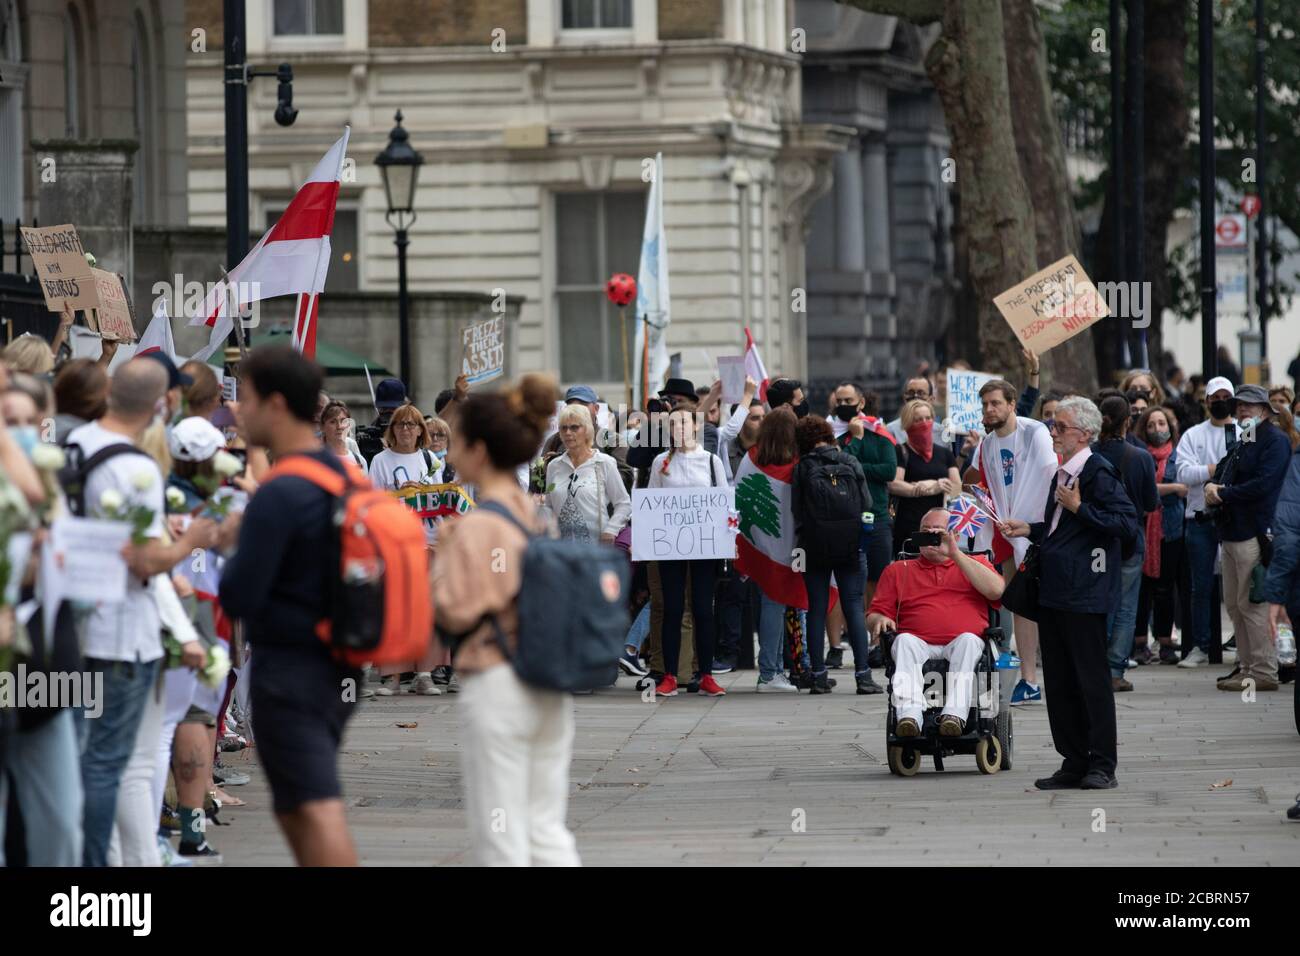 London, UK. 15th August, 2020. People hold a protests in Whitehall against corruption in the Lebanese and Belarusian government, following the huge explosion in Beirut and violent clashes in Belarus. Credit: Liam Asman/Alamy Live News Stock Photo